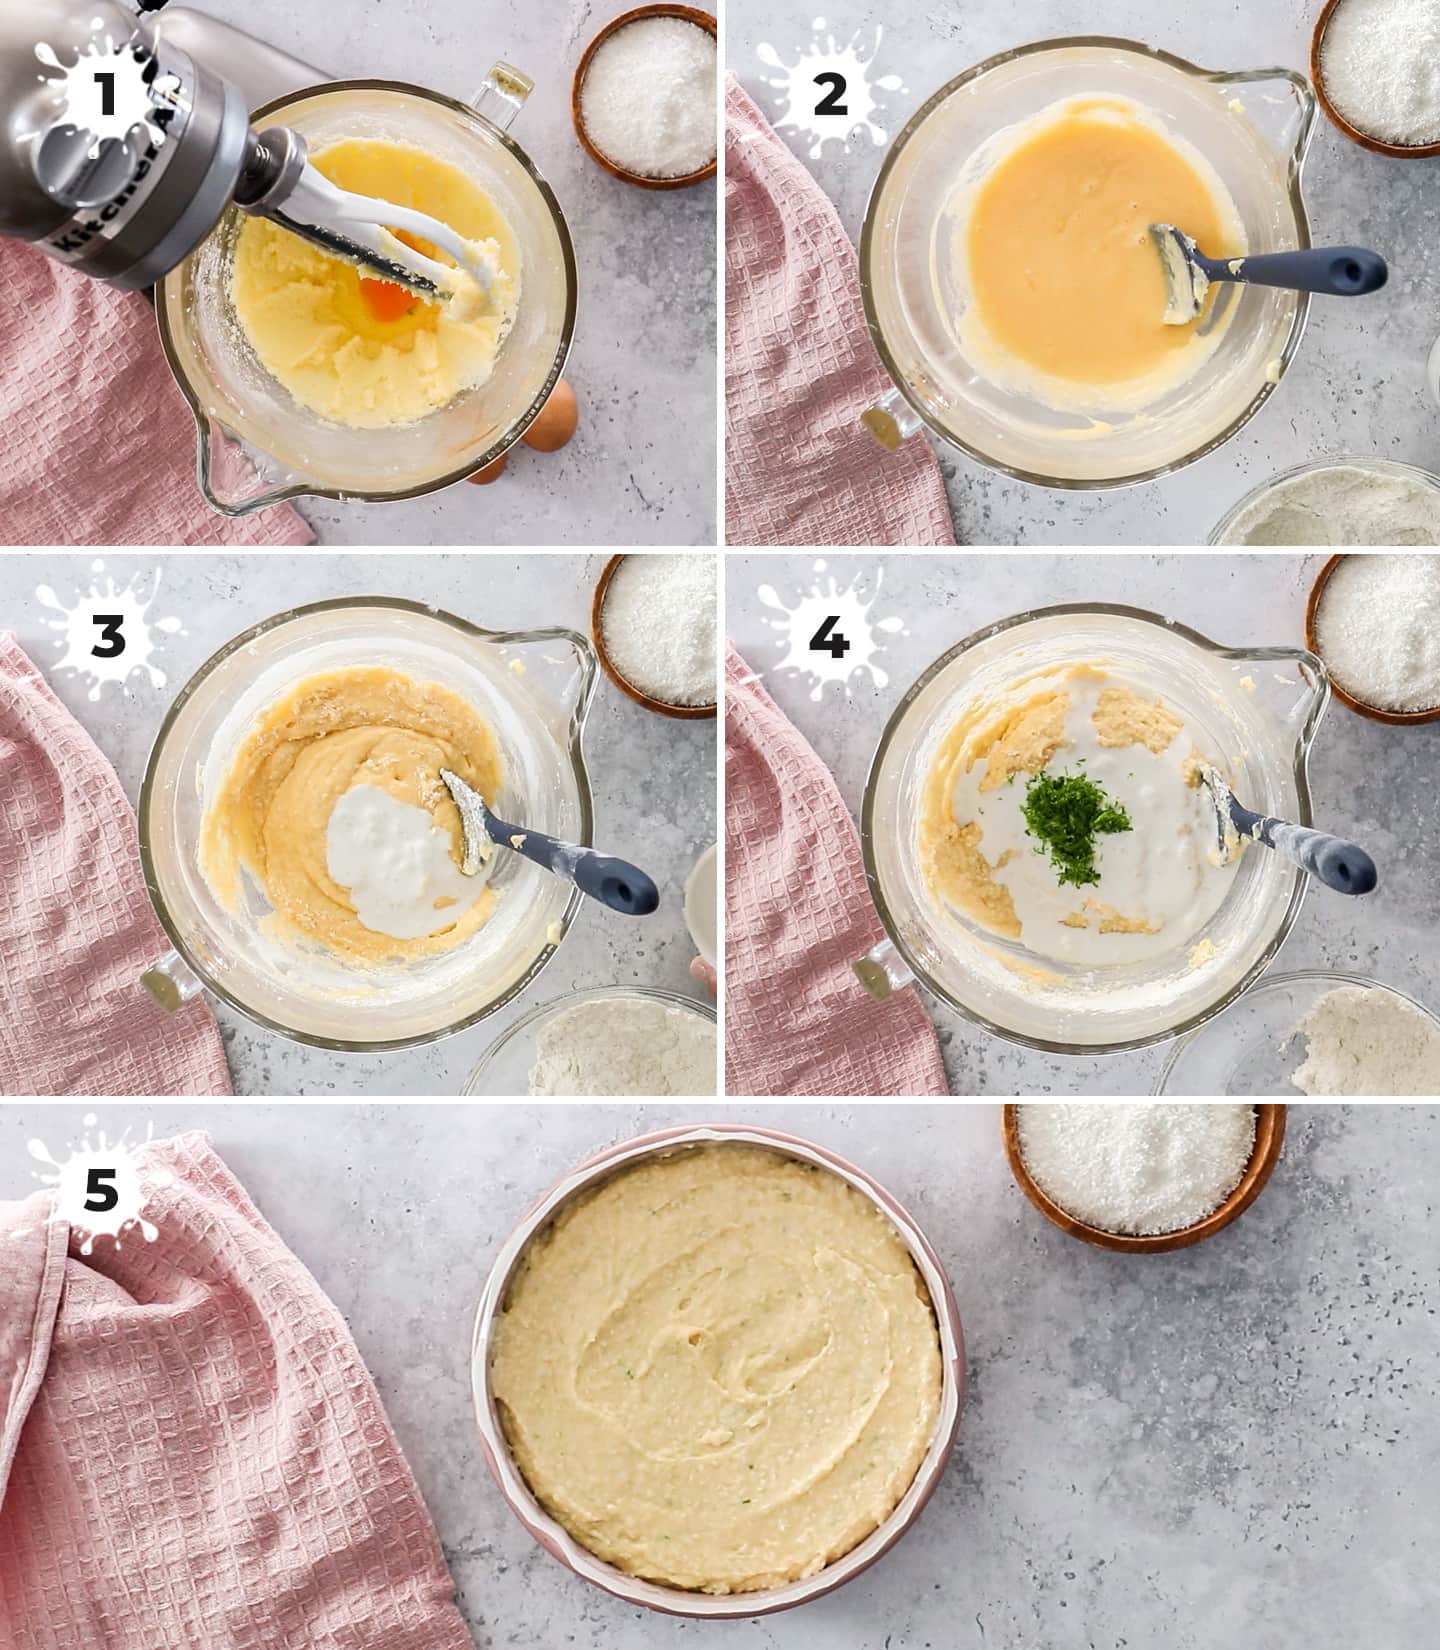 A collage of 5 images showing how to make lime and coconut cake.